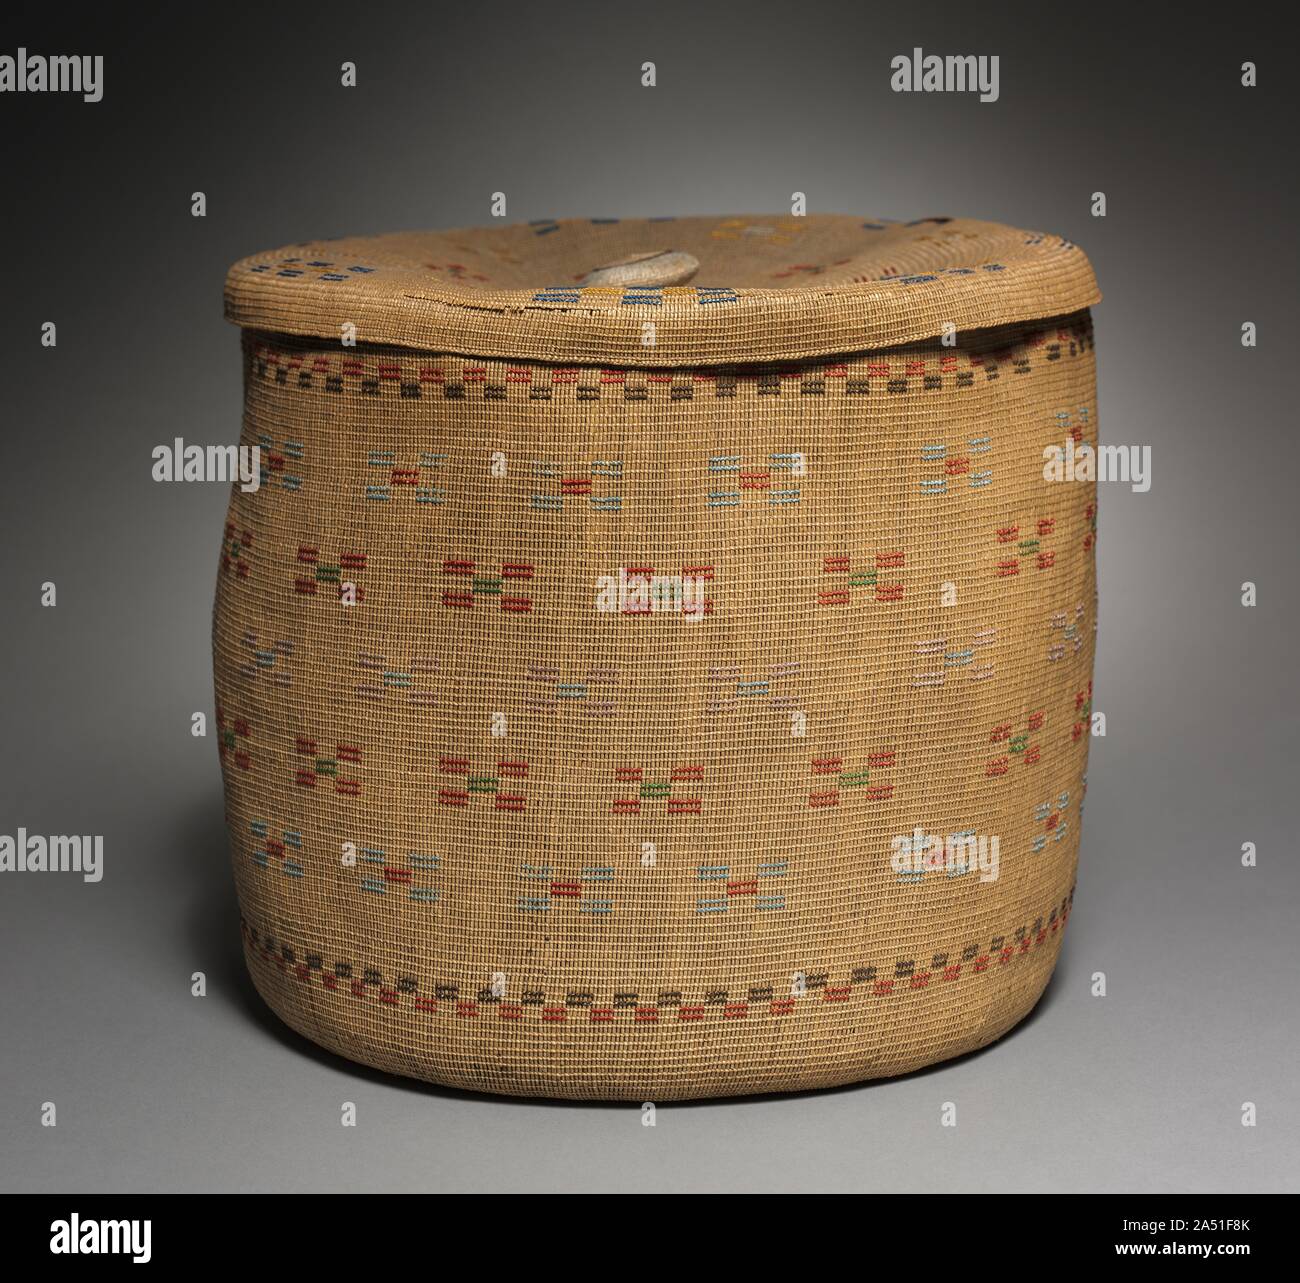 Lidded Twined Cylindrical Basket, late 1800 - early 1900. Stock Photo